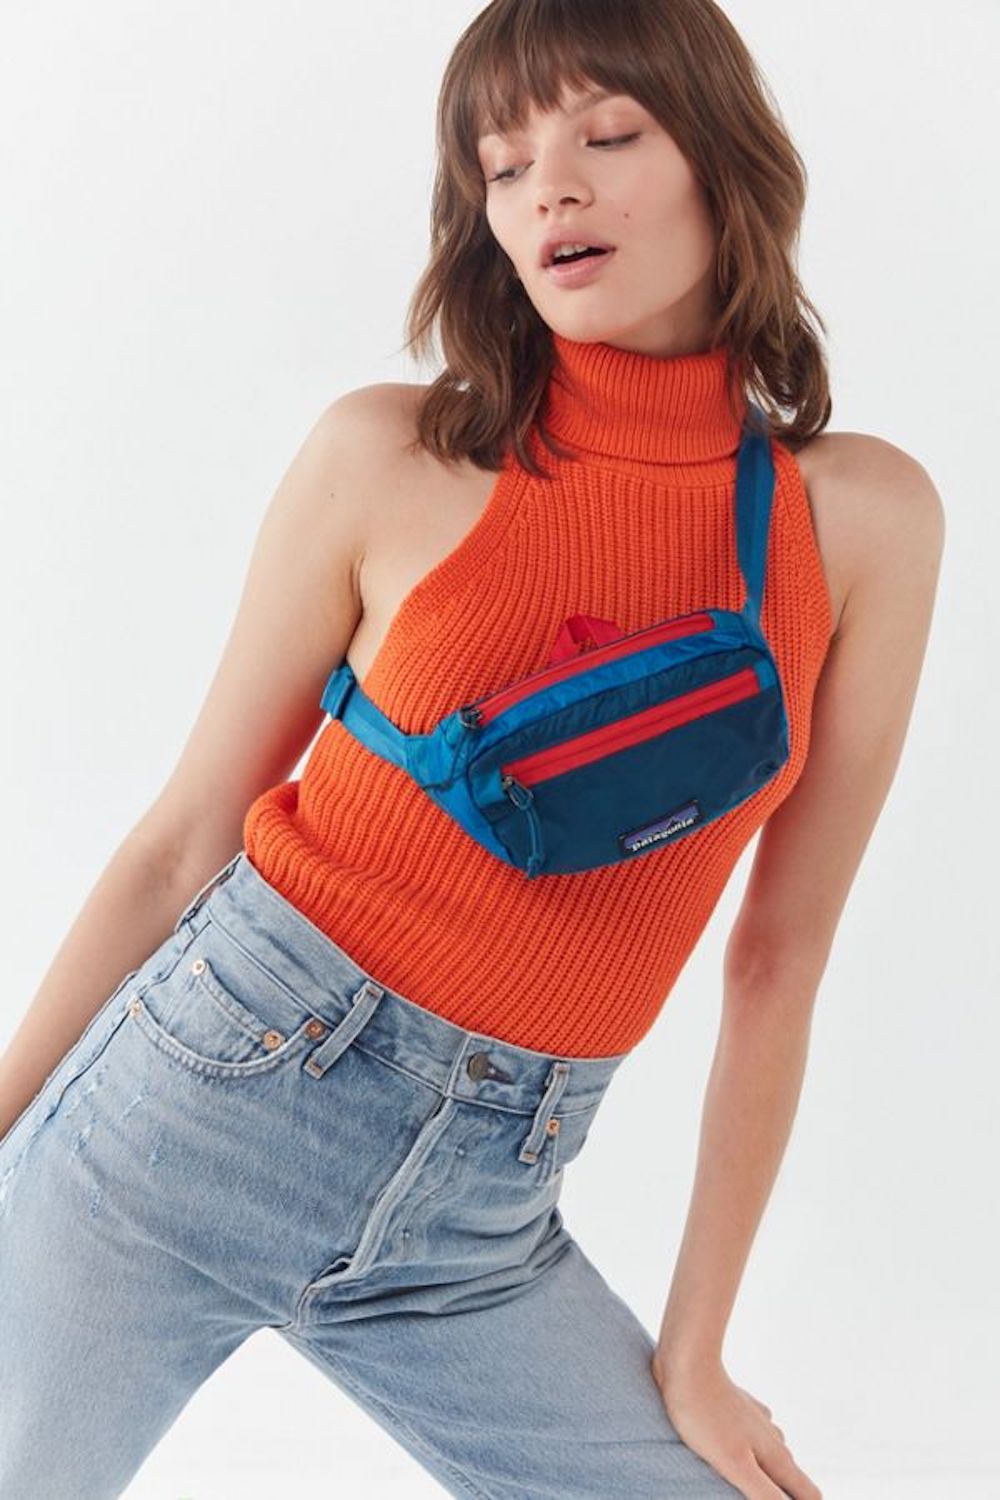 sporty travel fanny pack